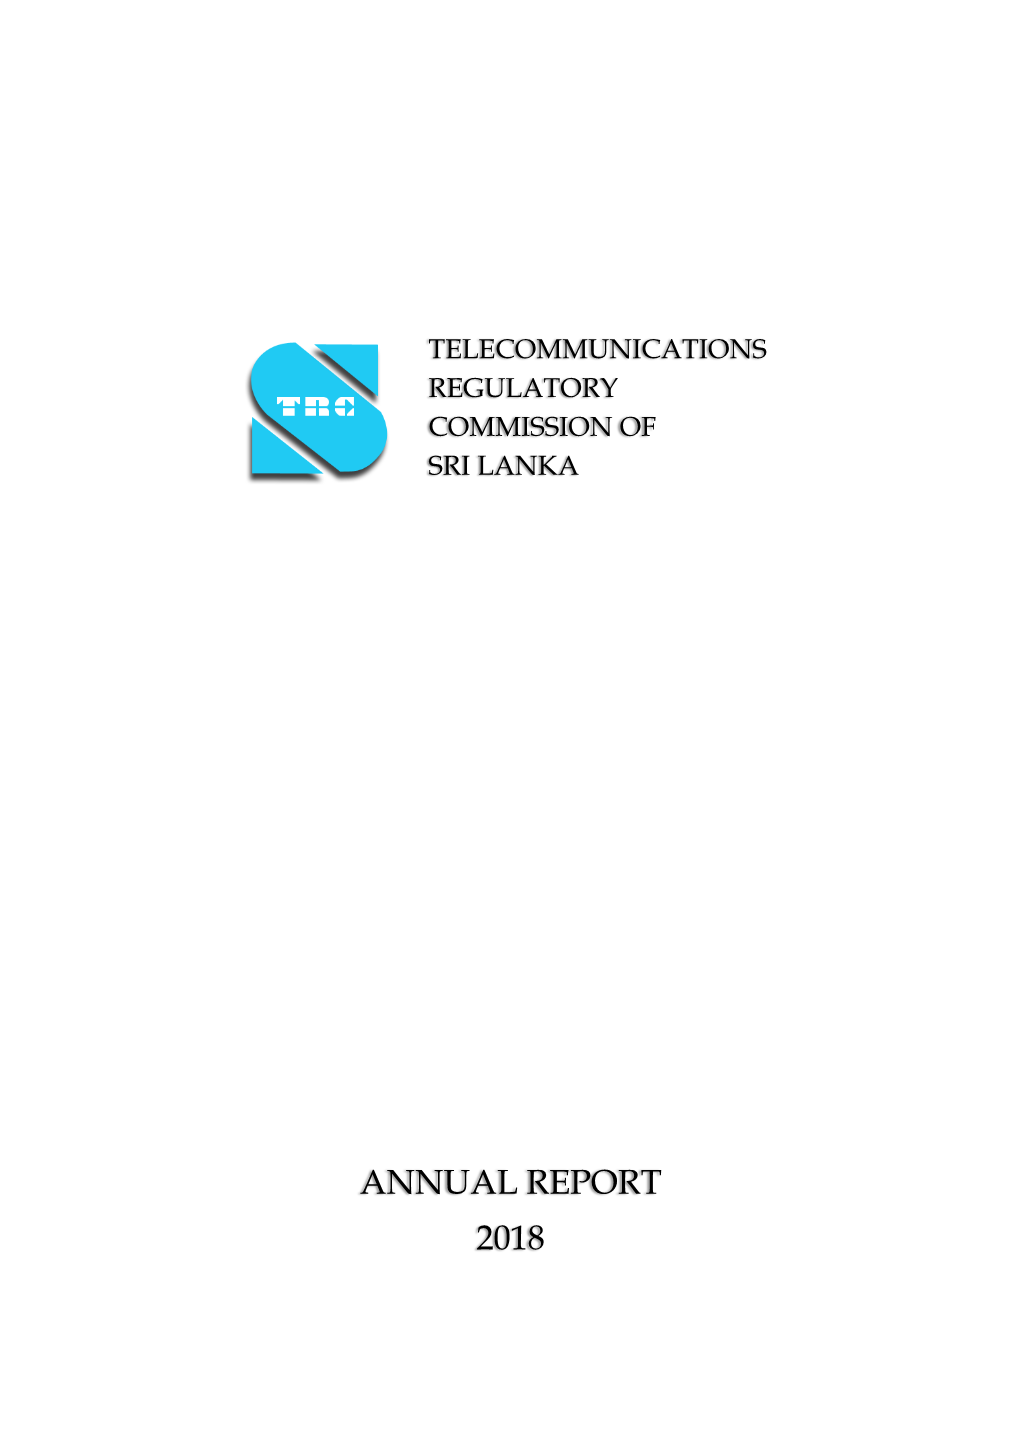 Annual Report of the Telecommunications Regulatory Commission of Sri Lanka for the Year 2018